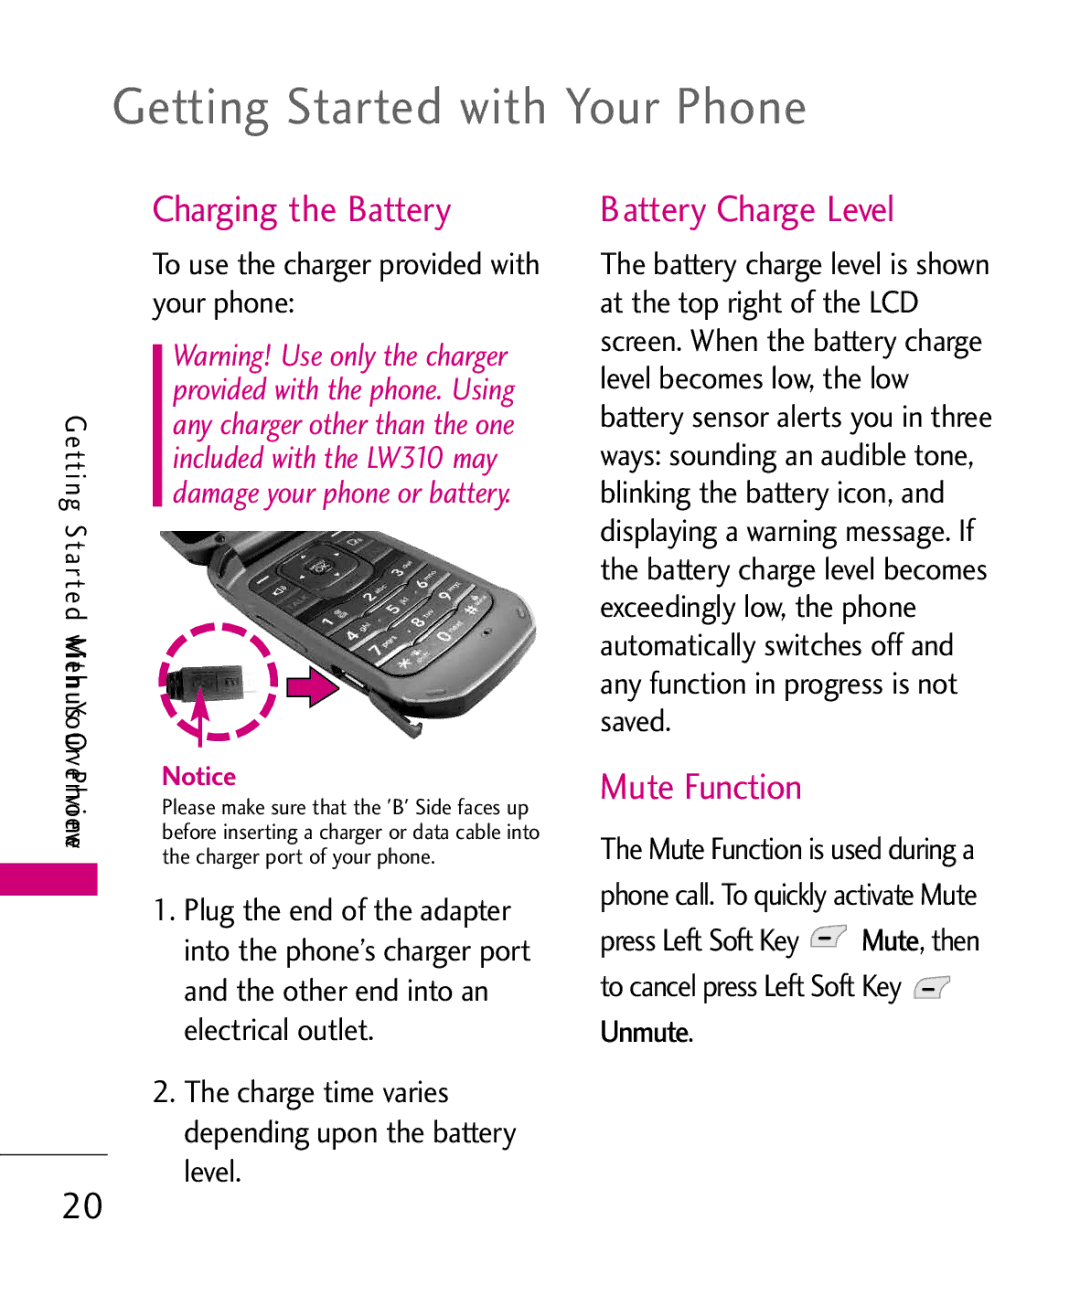 LG Electronics LW310KW, MMBB0352101 manual Getting Started with Your Phone, Charging the Battery, Mute Function, Level 